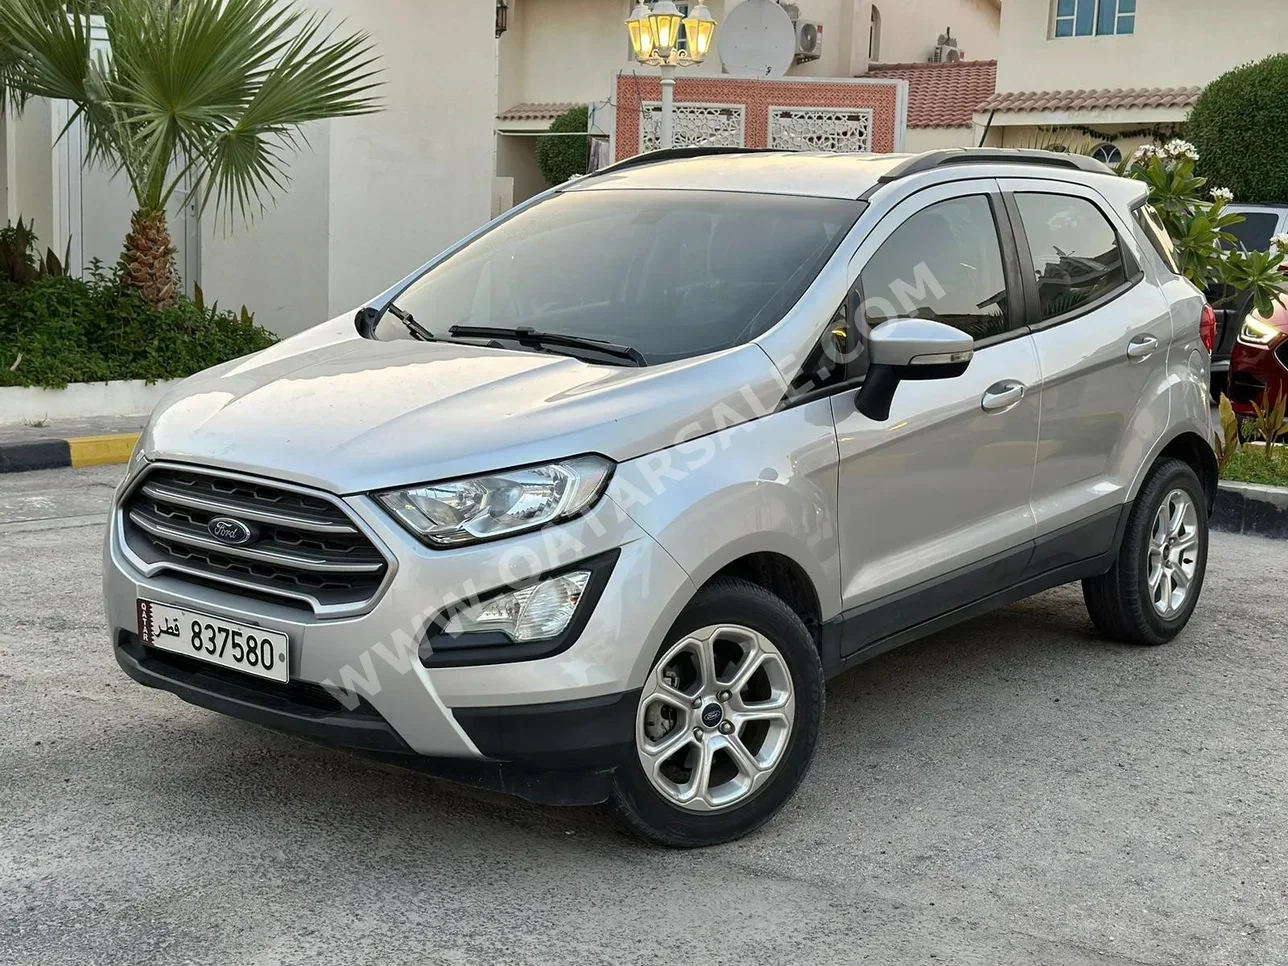 Ford  Eco Sport  Trend  2020  Automatic  17,000 Km  3 Cylinder  Front Wheel Drive (FWD)  SUV  Silver